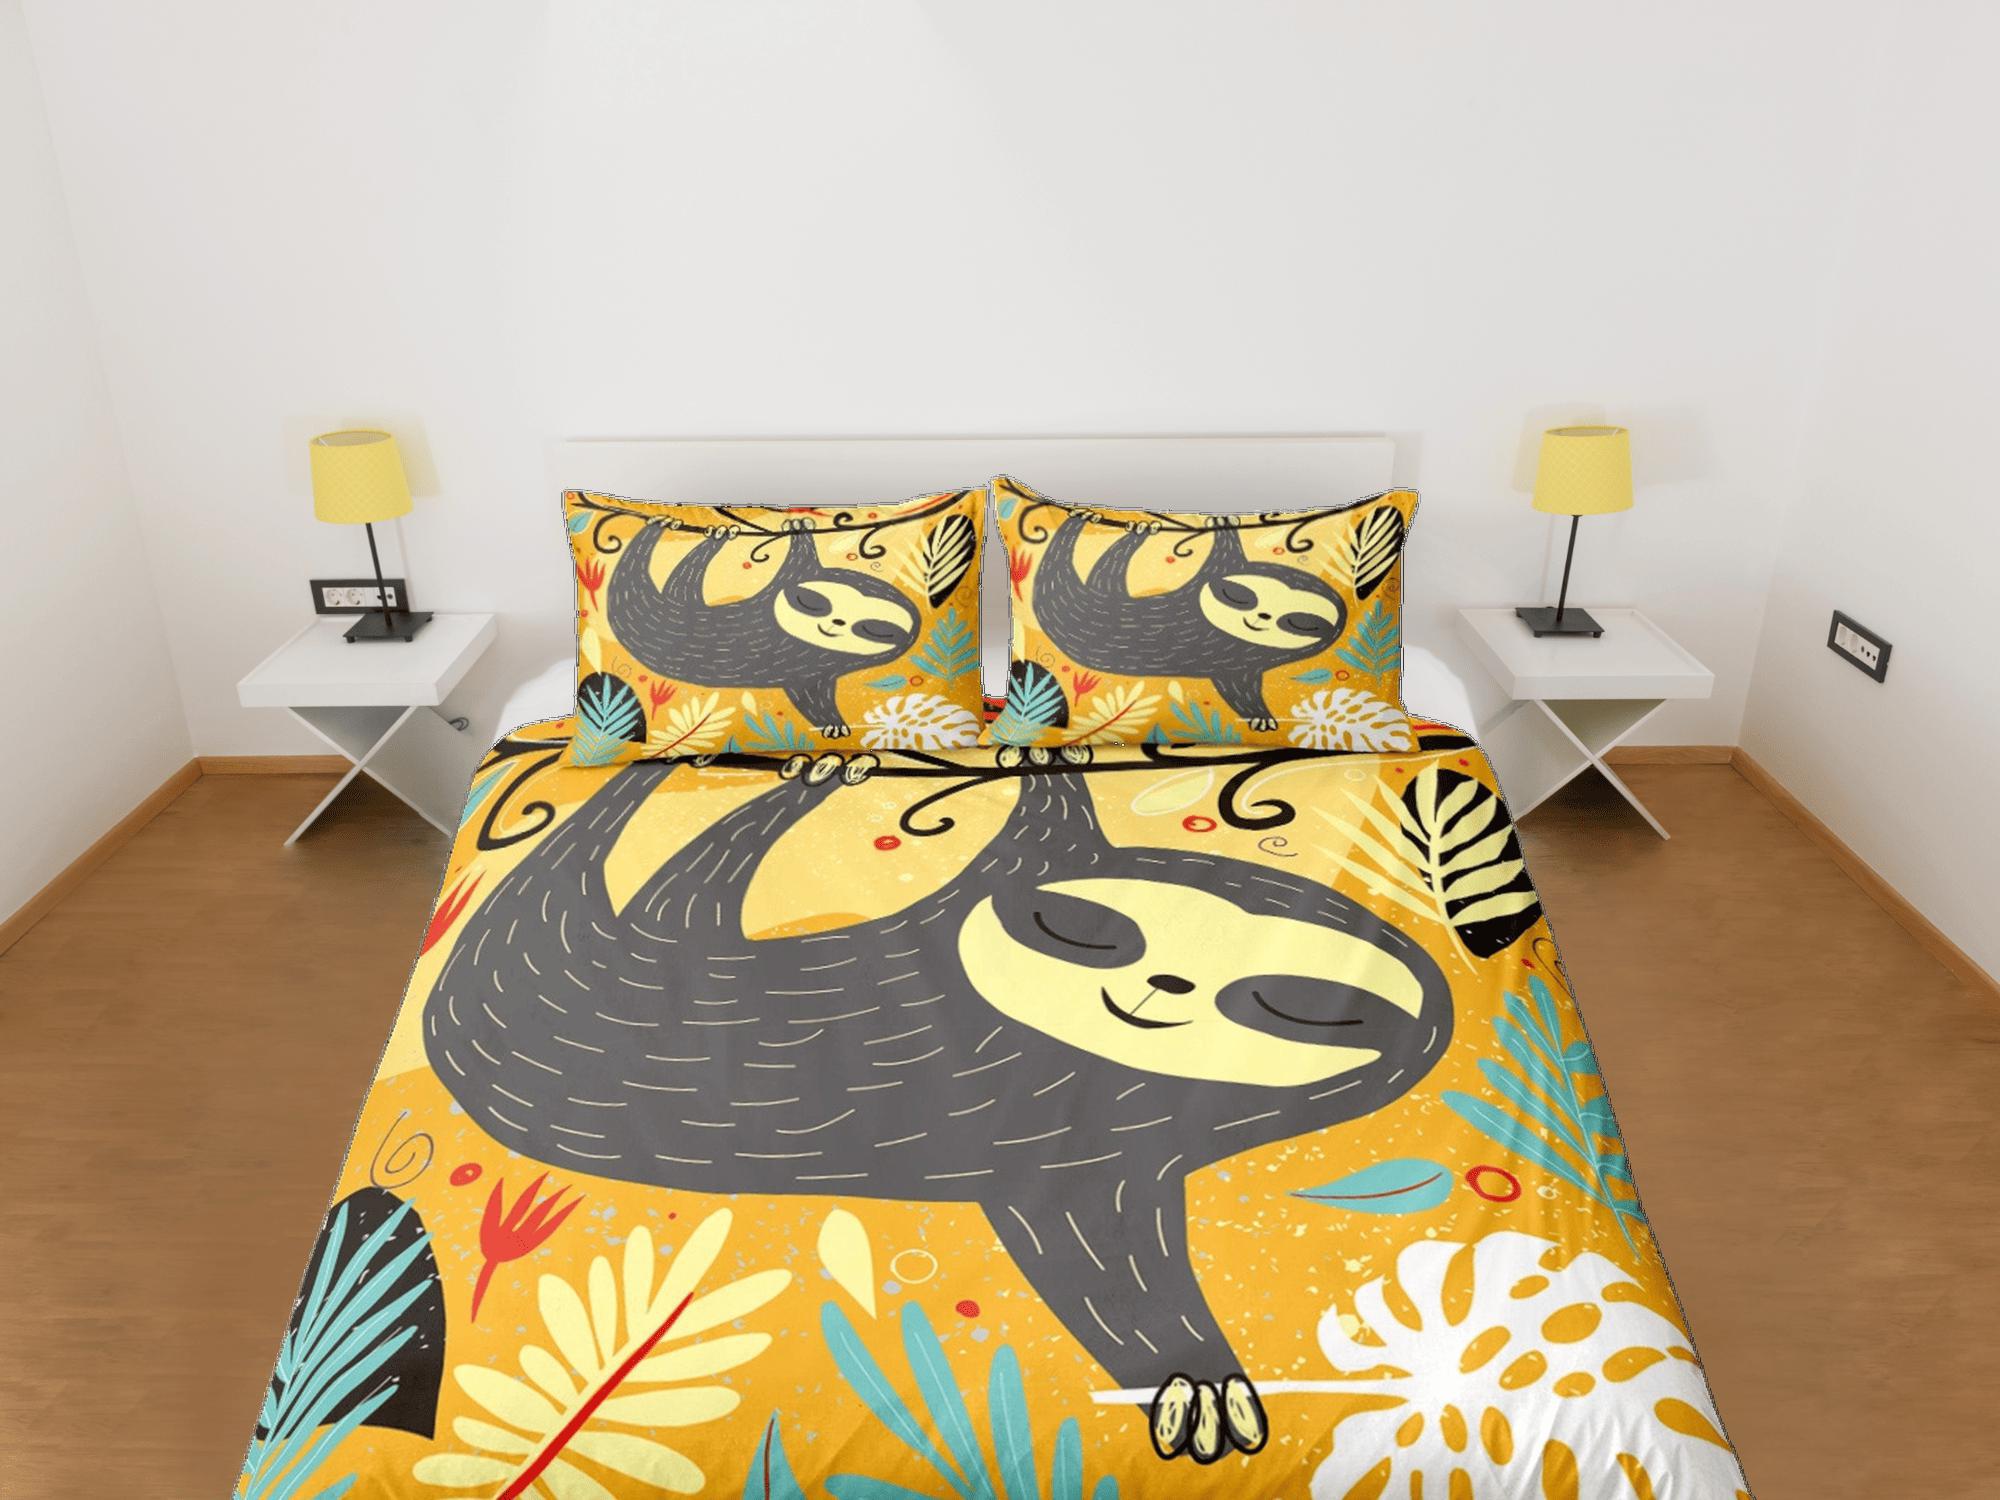 daintyduvet Cute Sloth Yellow Duvet Cover Set Colorful Bedspread, Kids Full Bedding Set with Pillowcase, Comforter Cover Twin